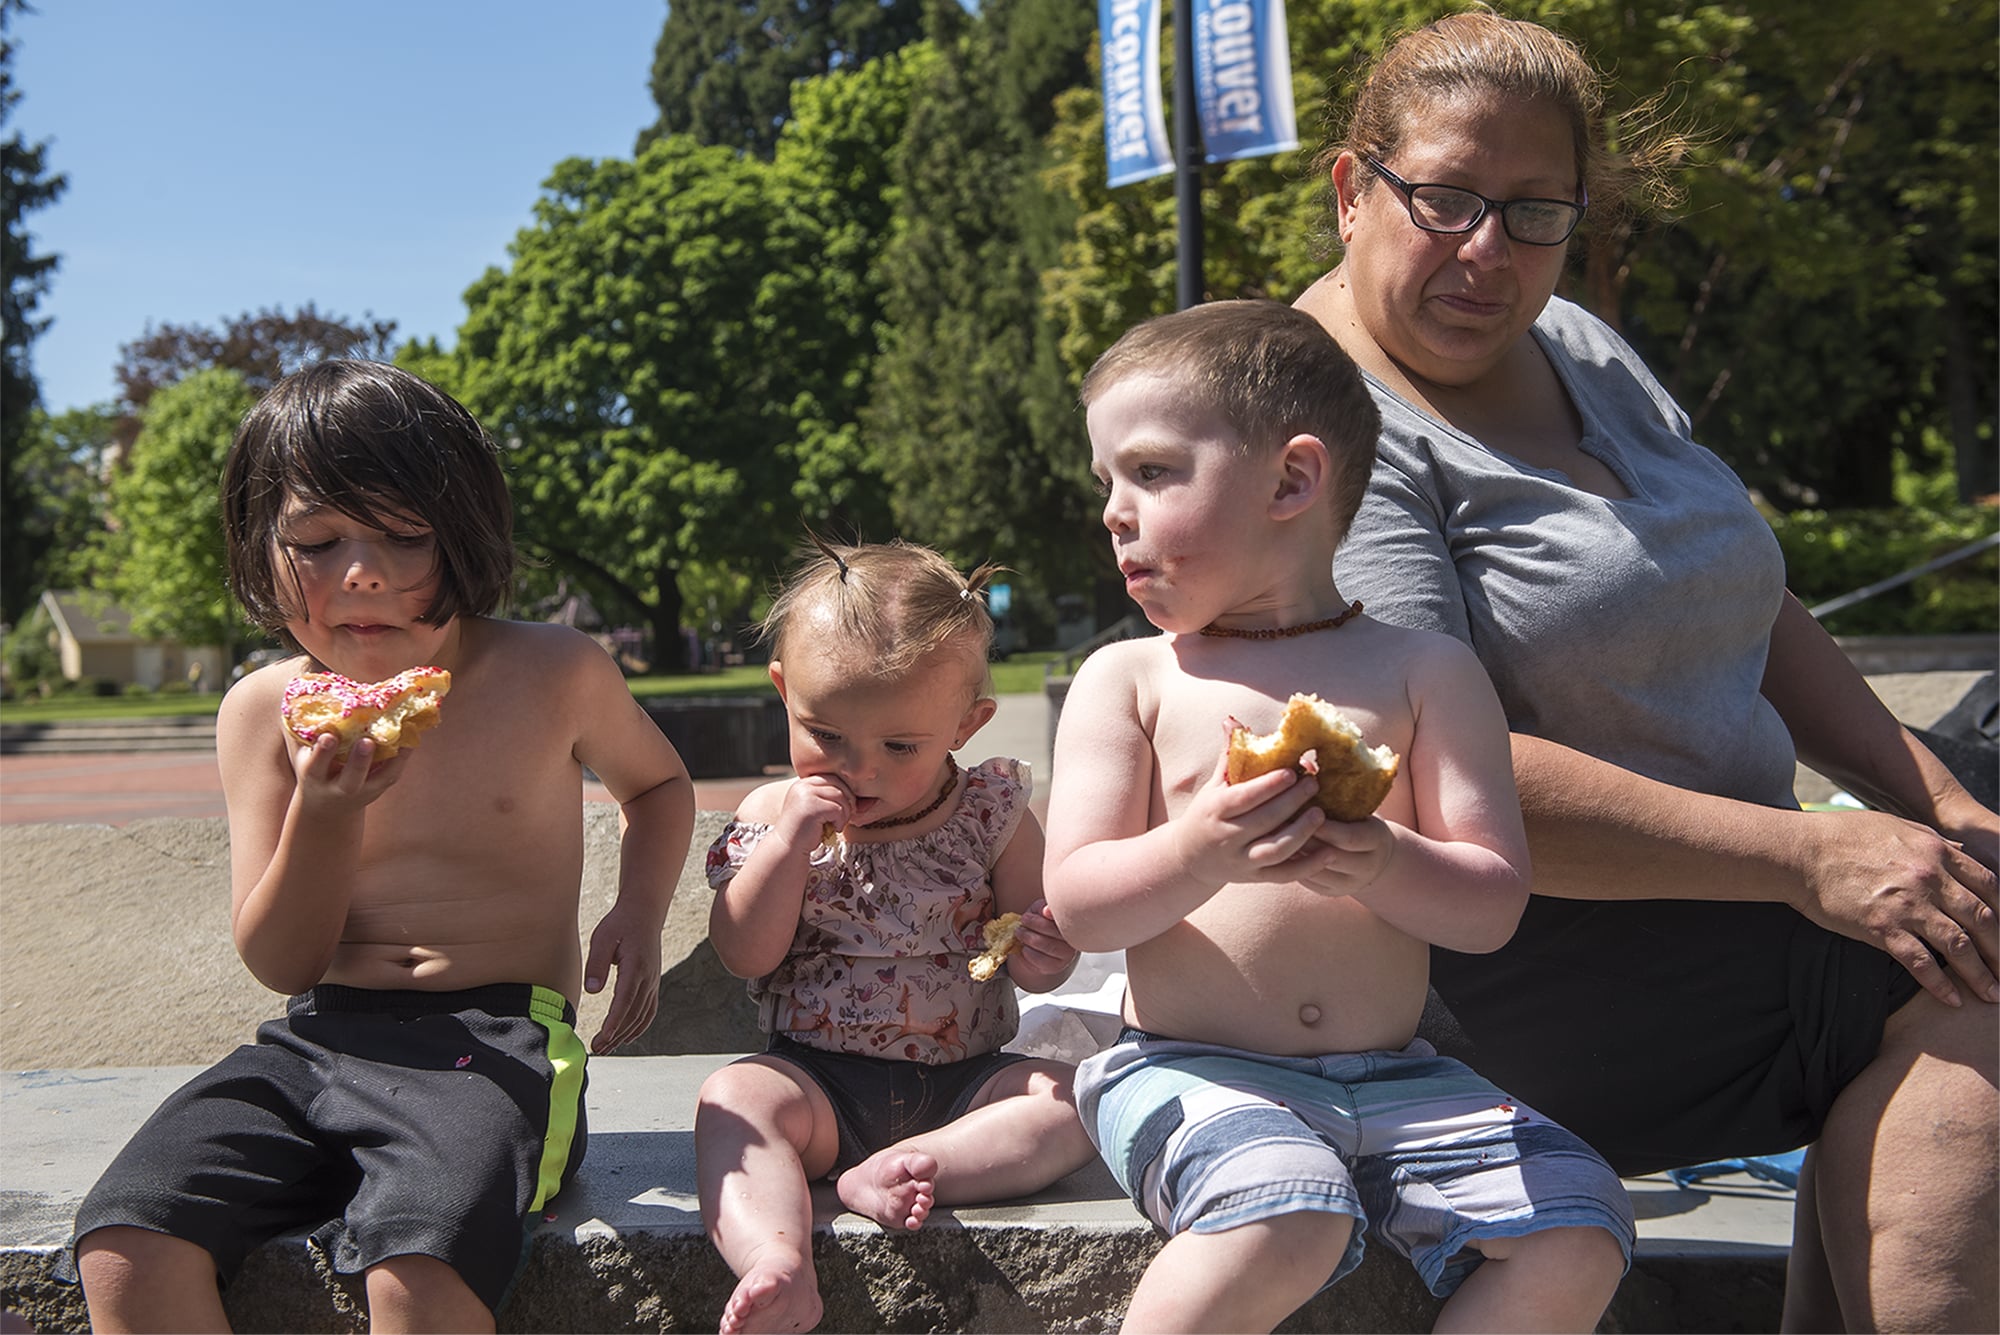 Luka Easterling, 5, from left, Skyler Tumm, 8 months, Logan Tumm, 2, and Brenda Serrano snack on donuts after playing in the water feature in Esther Short Park on Wednesday afternoon, May 8, 2019.